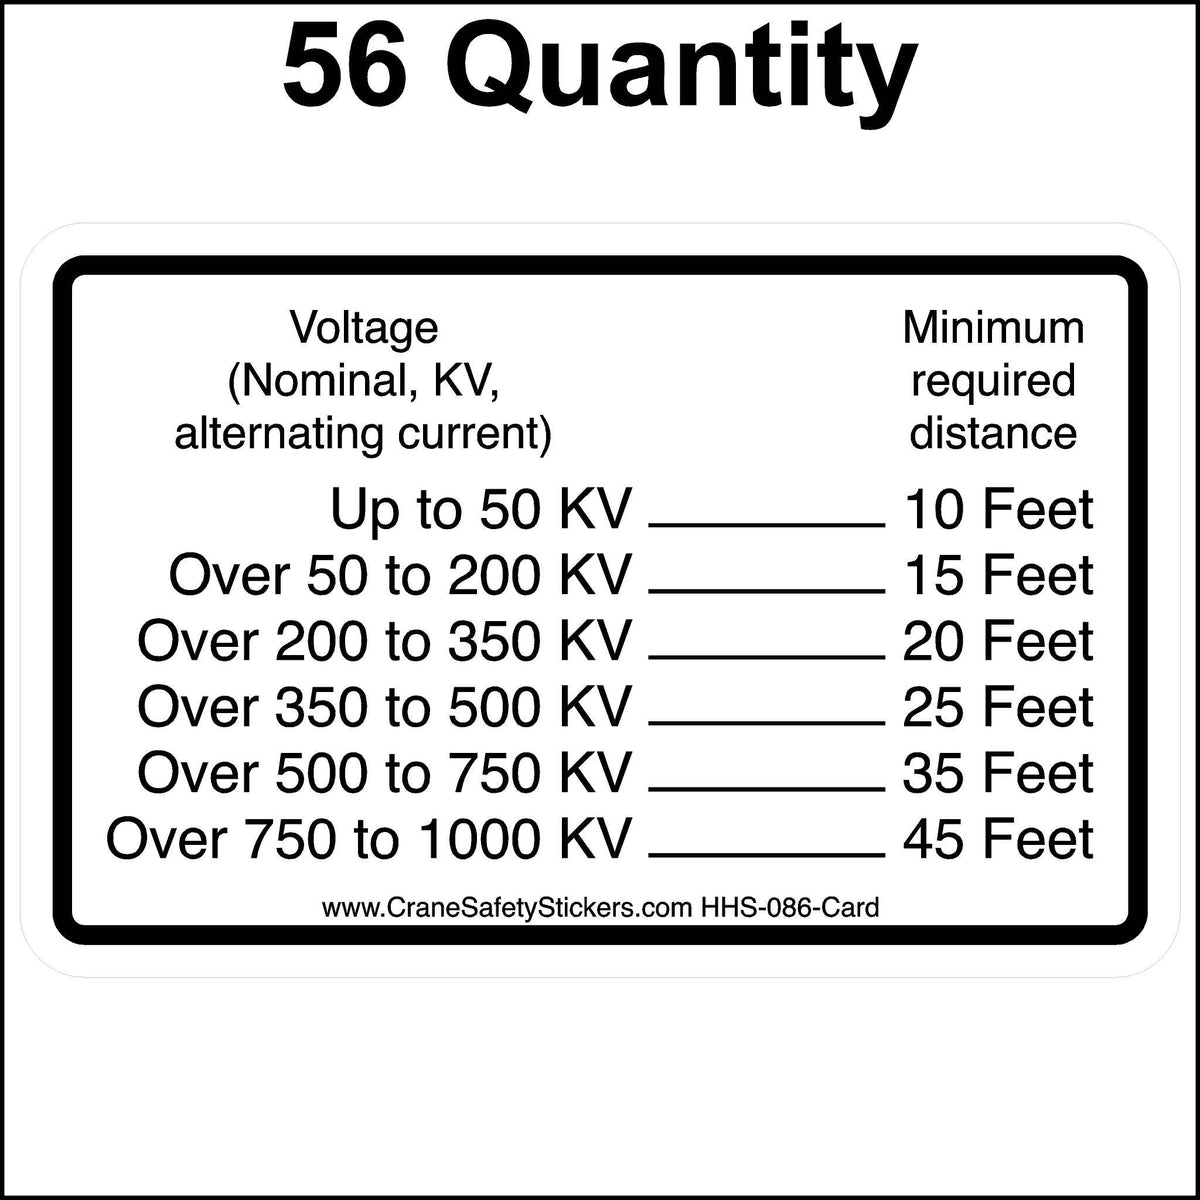 Powerline Clearance Requirements Card Sticker. 56 Quantity.